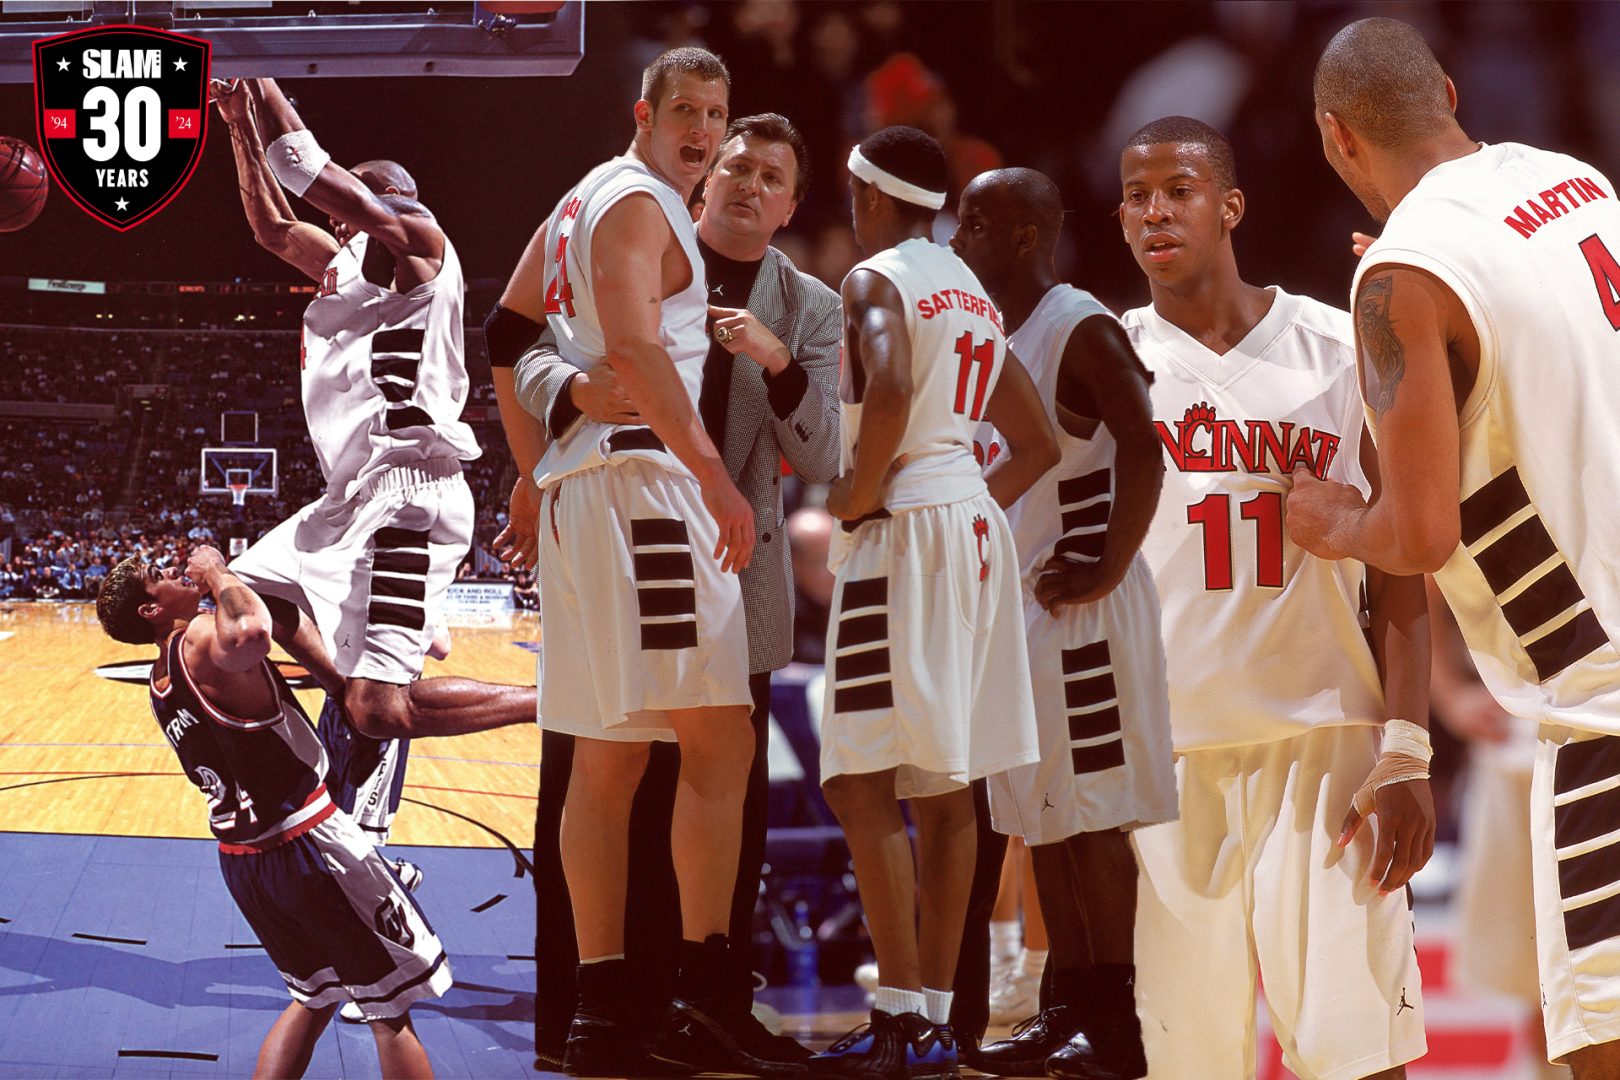 The 30 Most Influential NCAA MBB Teams of SLAM’s 30 Years: Full List